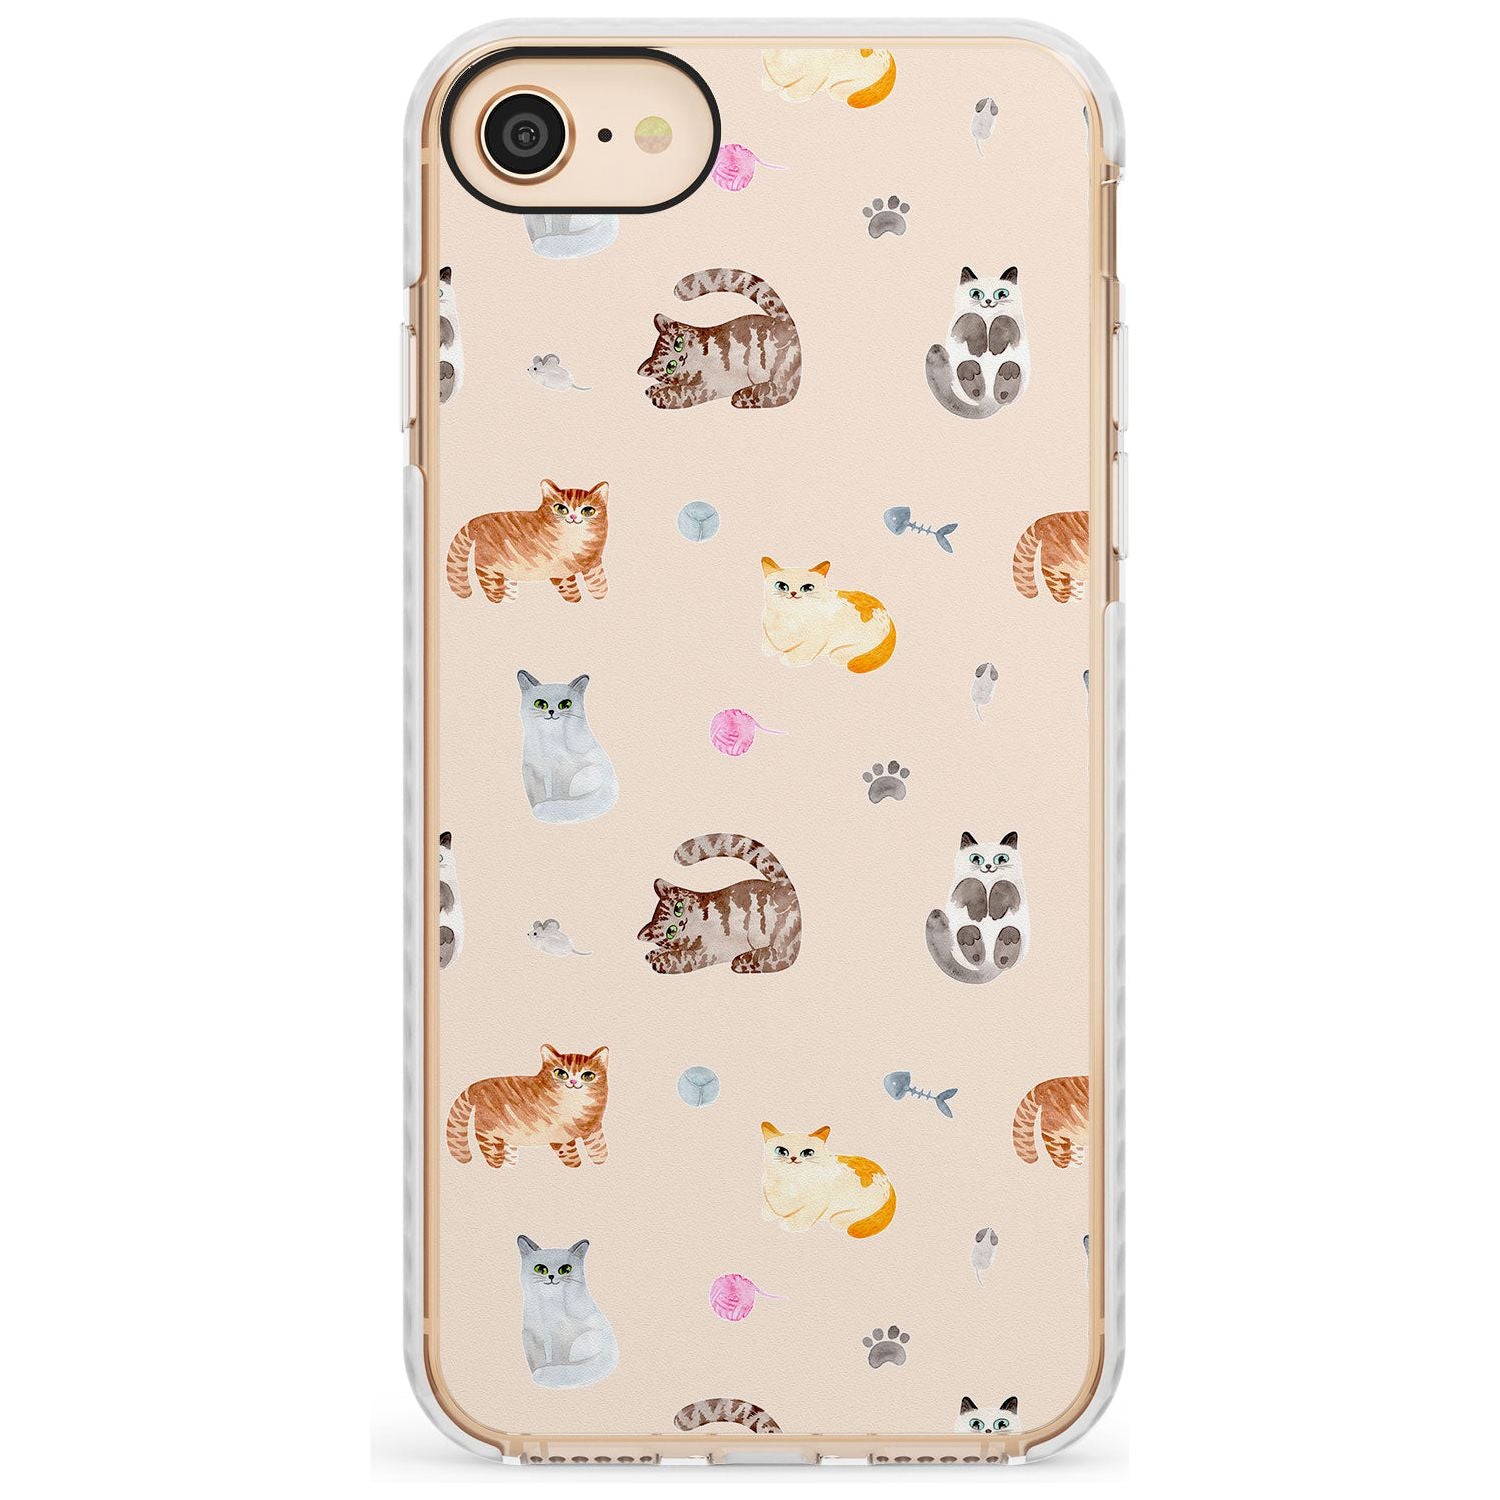 Cats with Toys Slim TPU Phone Case for iPhone SE 8 7 Plus